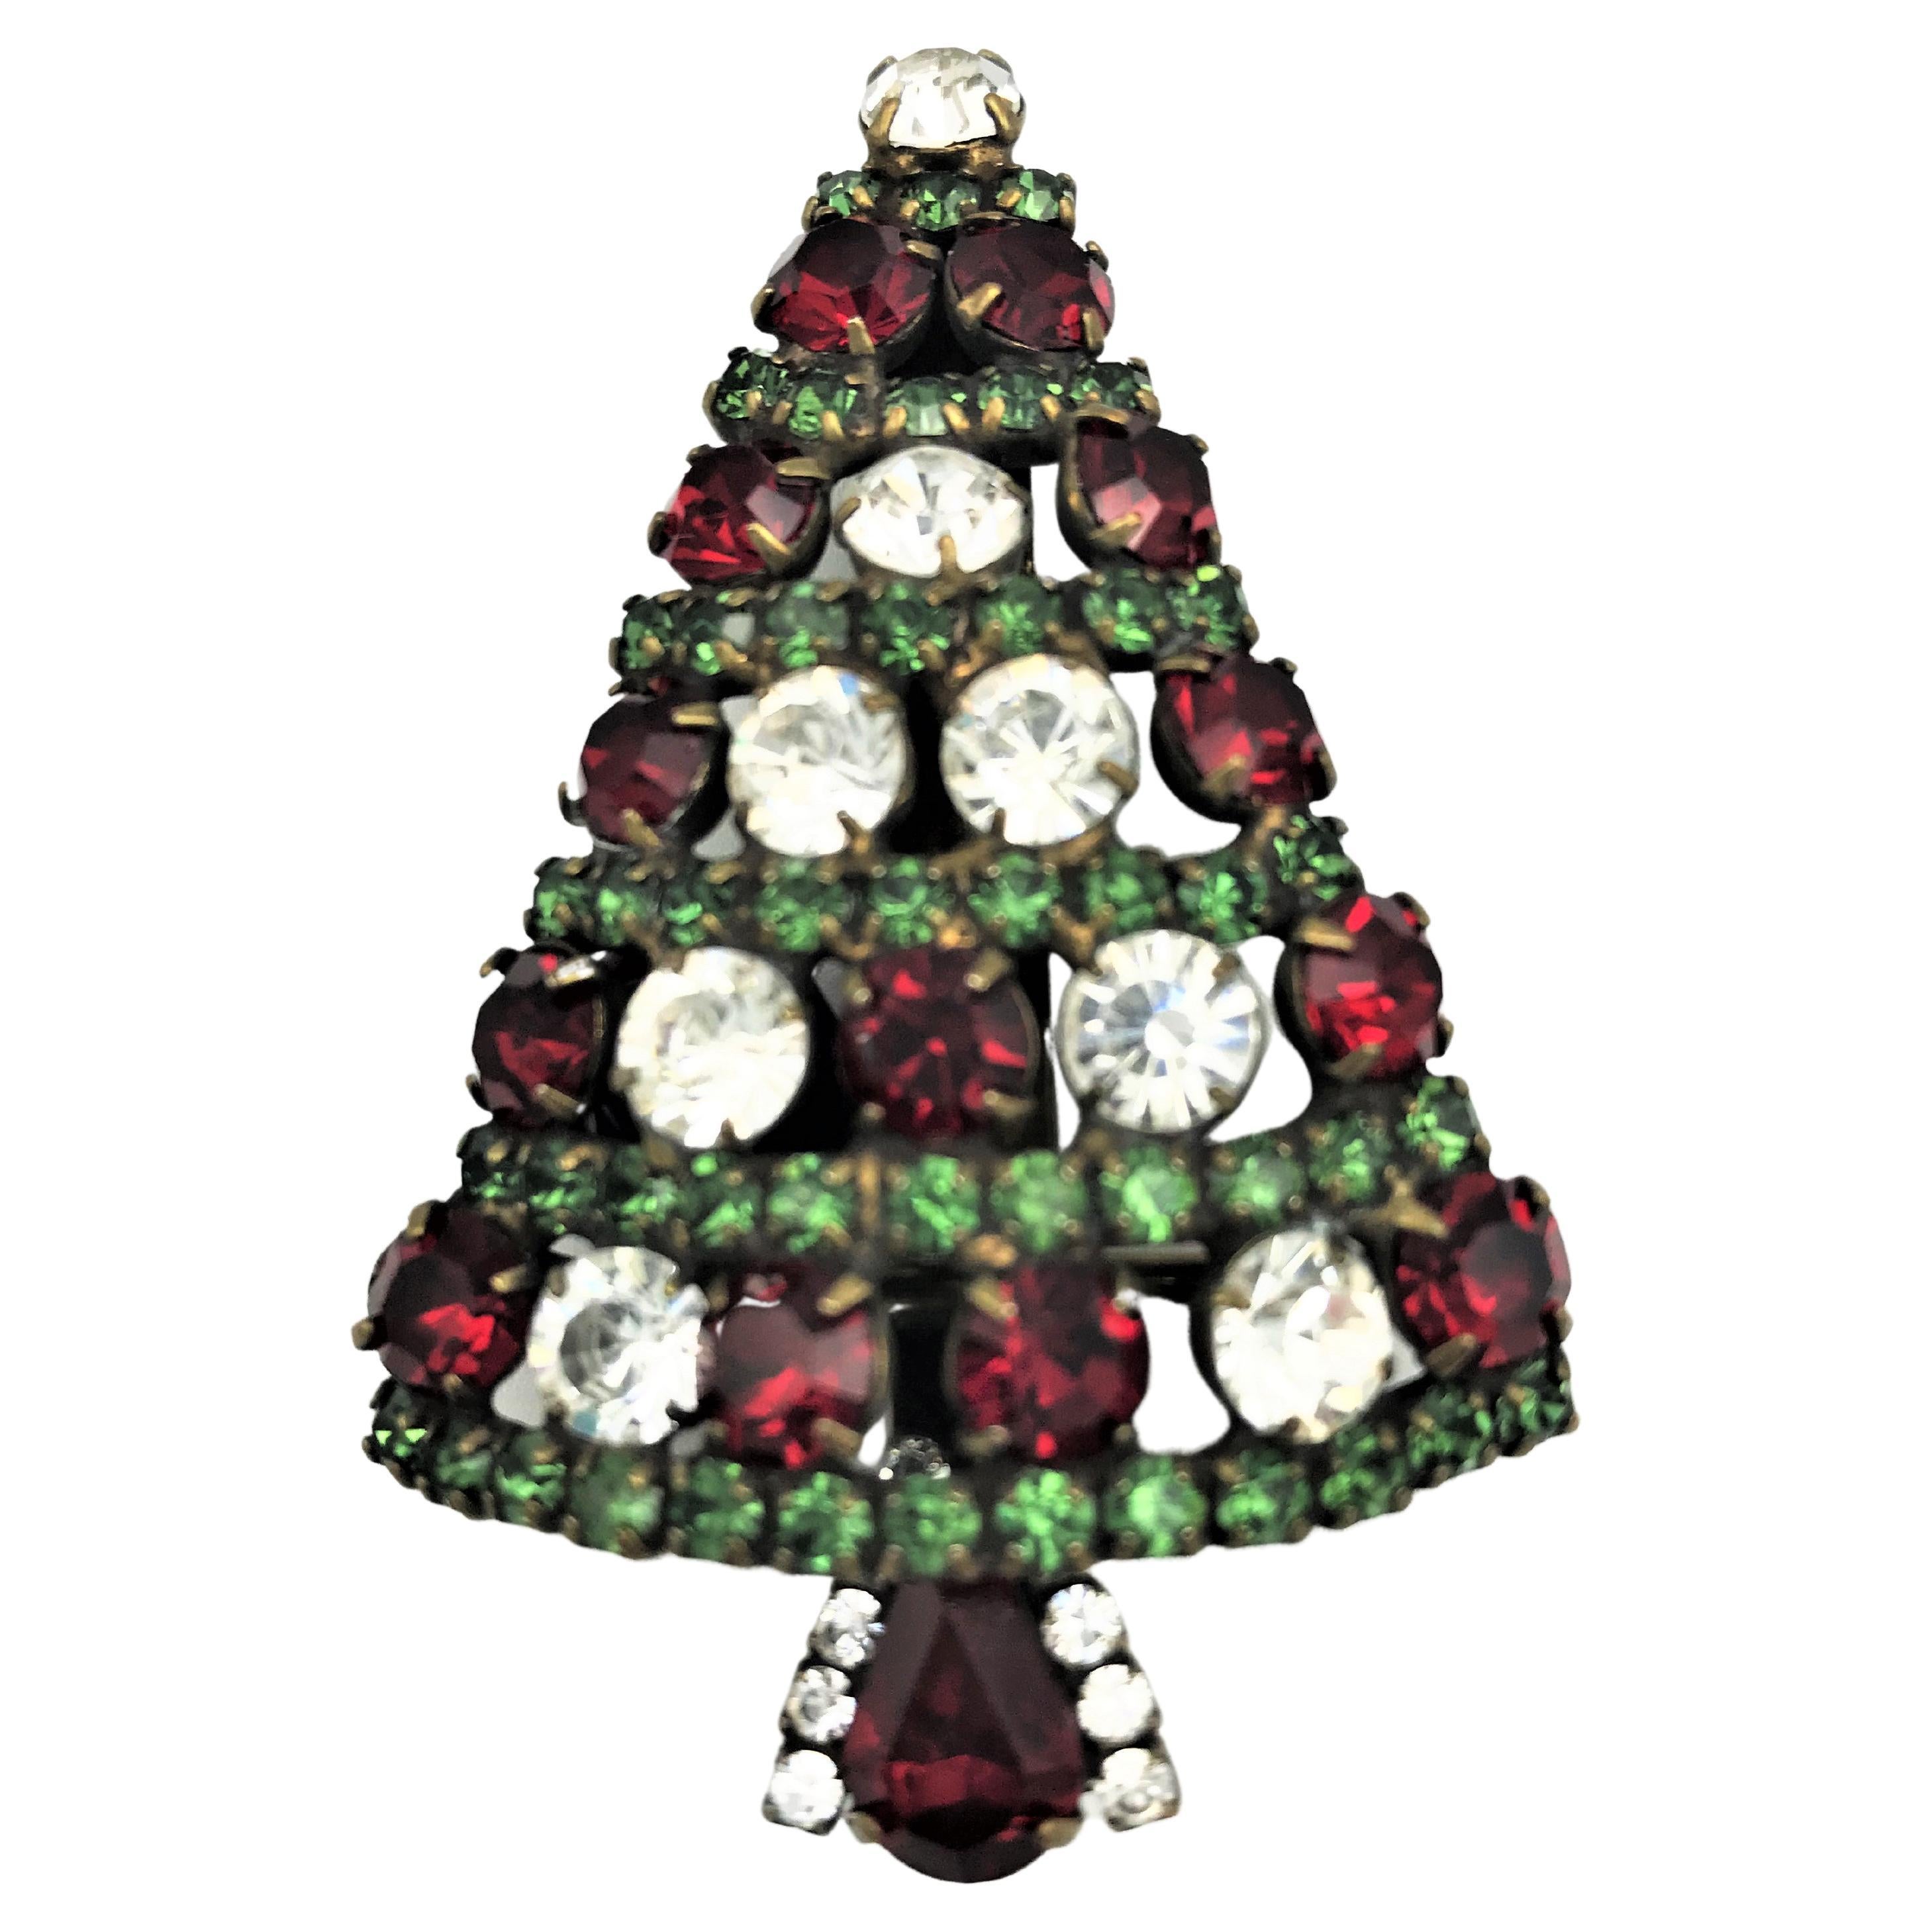 Christmas is coming soon!       Who wouldn't want to adorn themselves with a Christmas tree brooch.
This sparkling treasure is designed and manufactured in California by Dorothy Bauer. She expresses her love of color in a witty and humorous